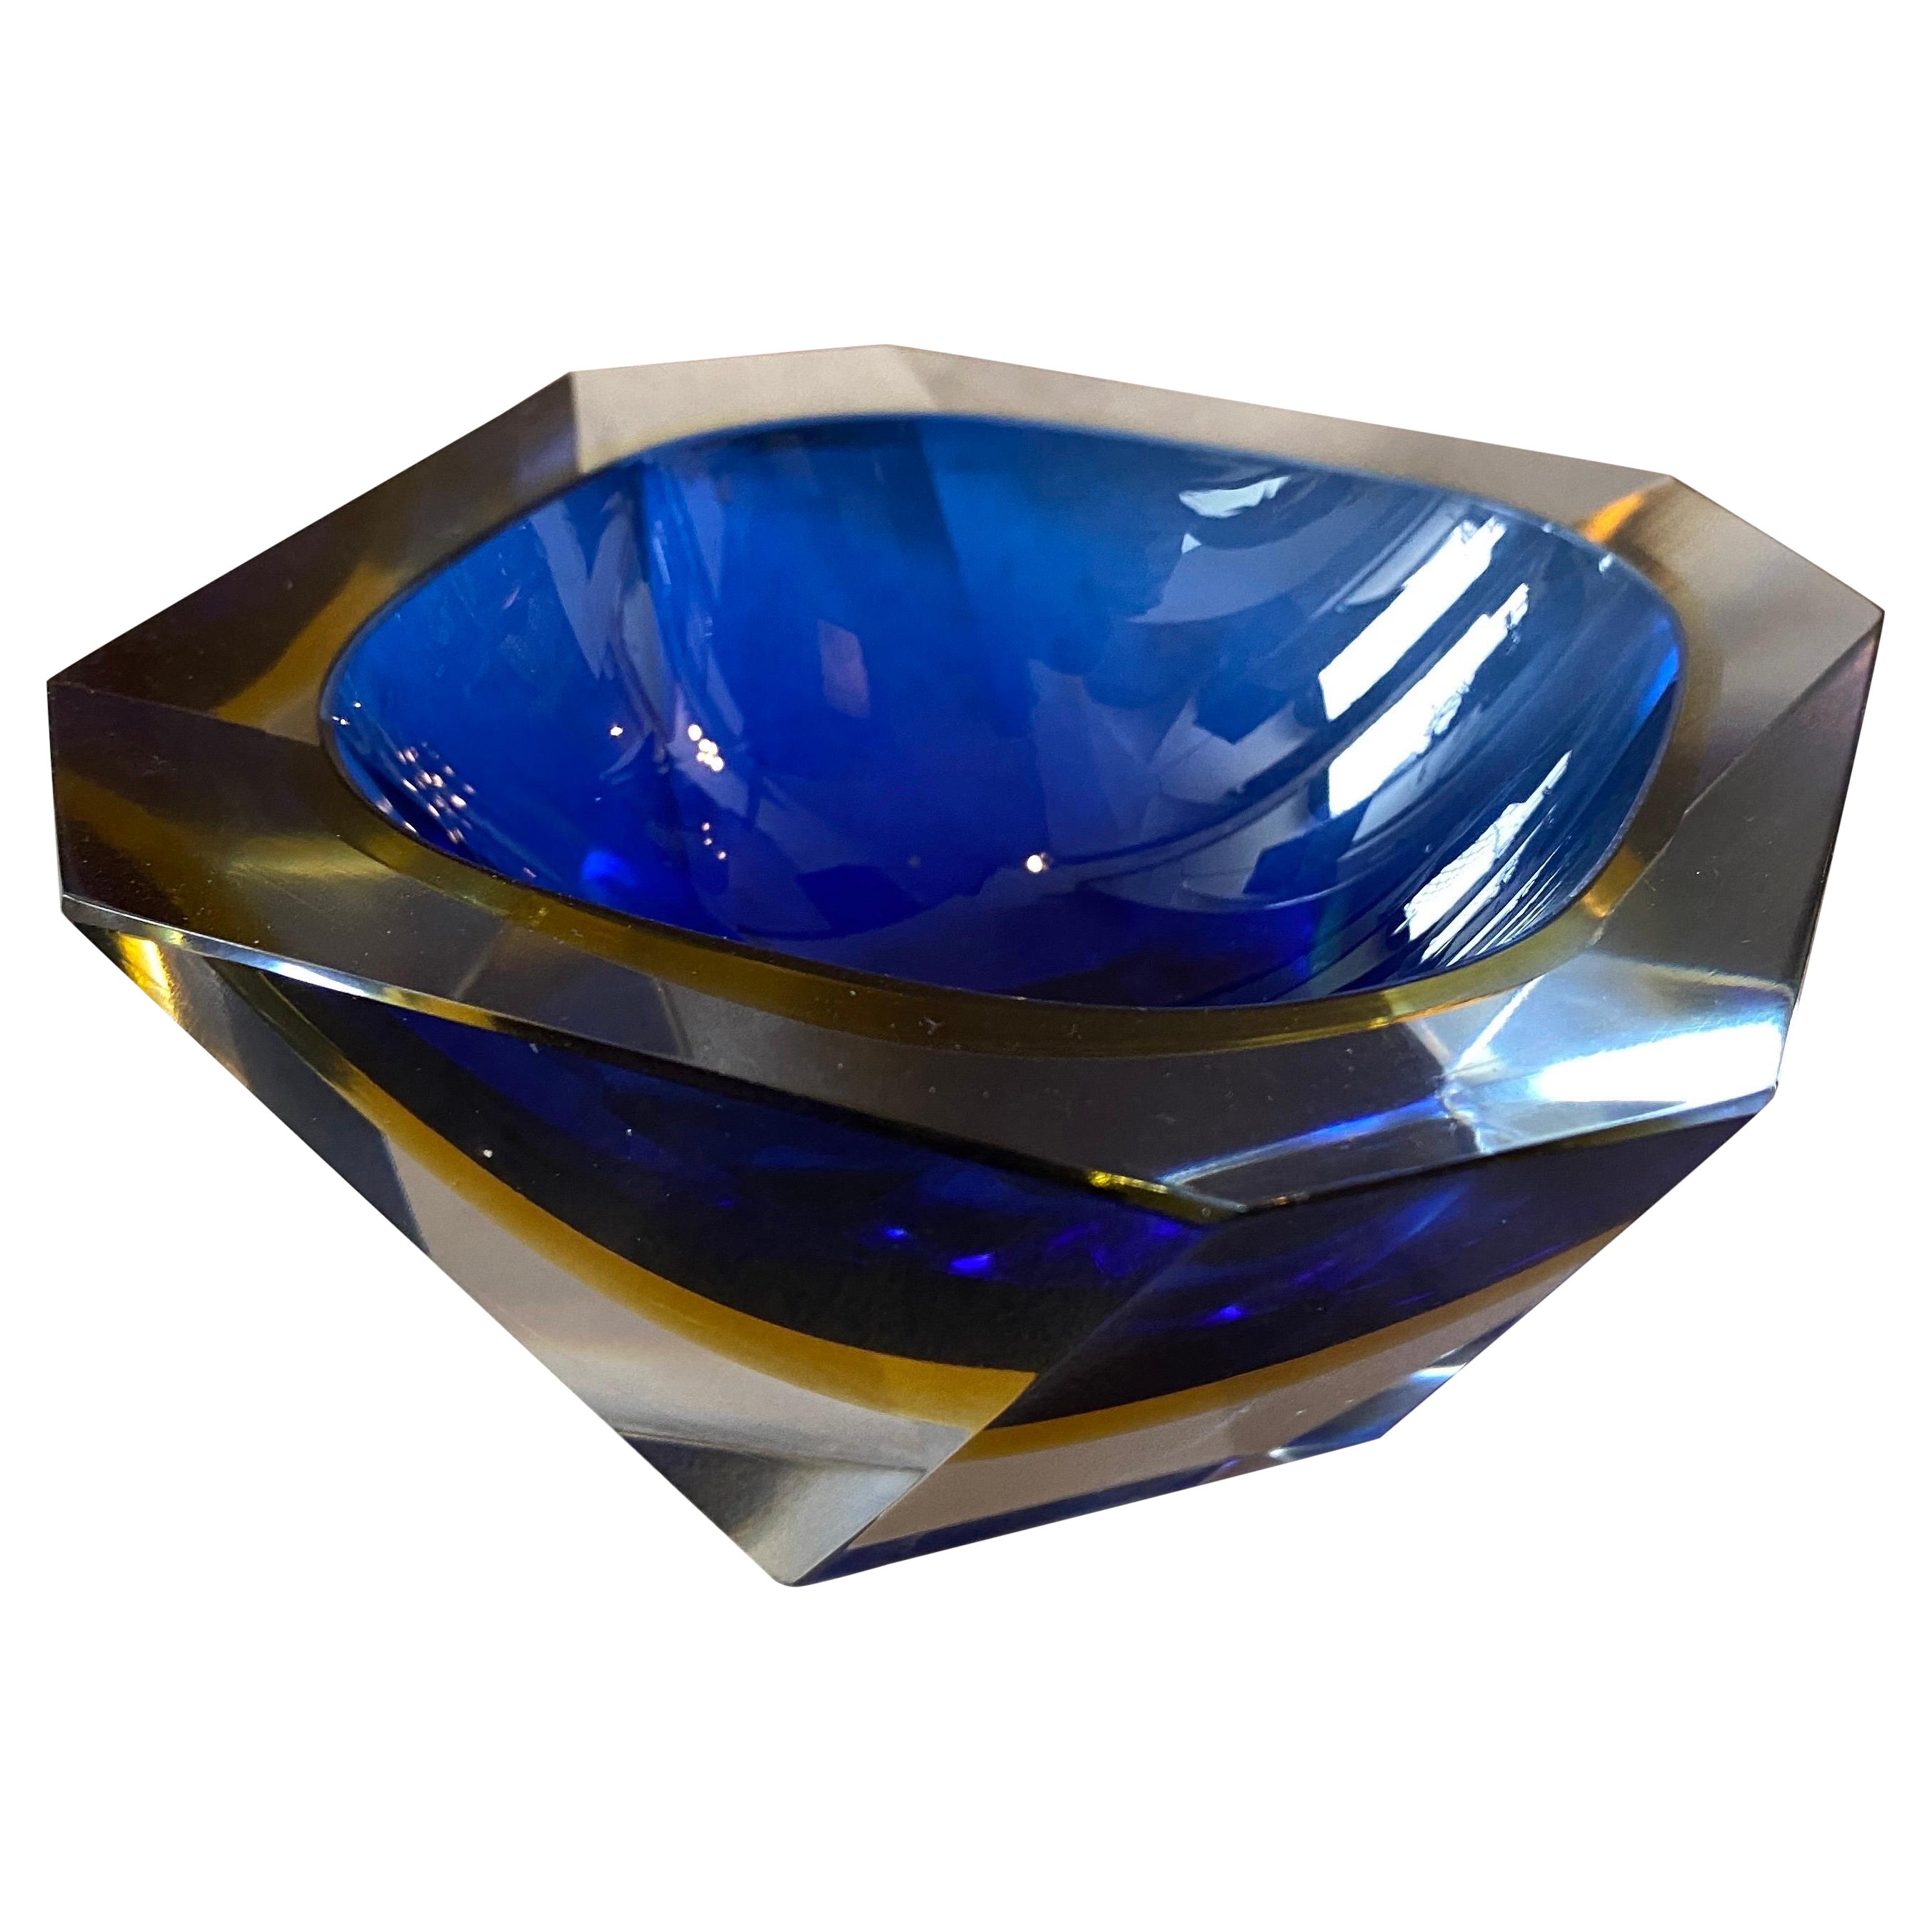 1970s Blue and Yellow Sommerso Faceted Murano Glass Ashtray by Seguso